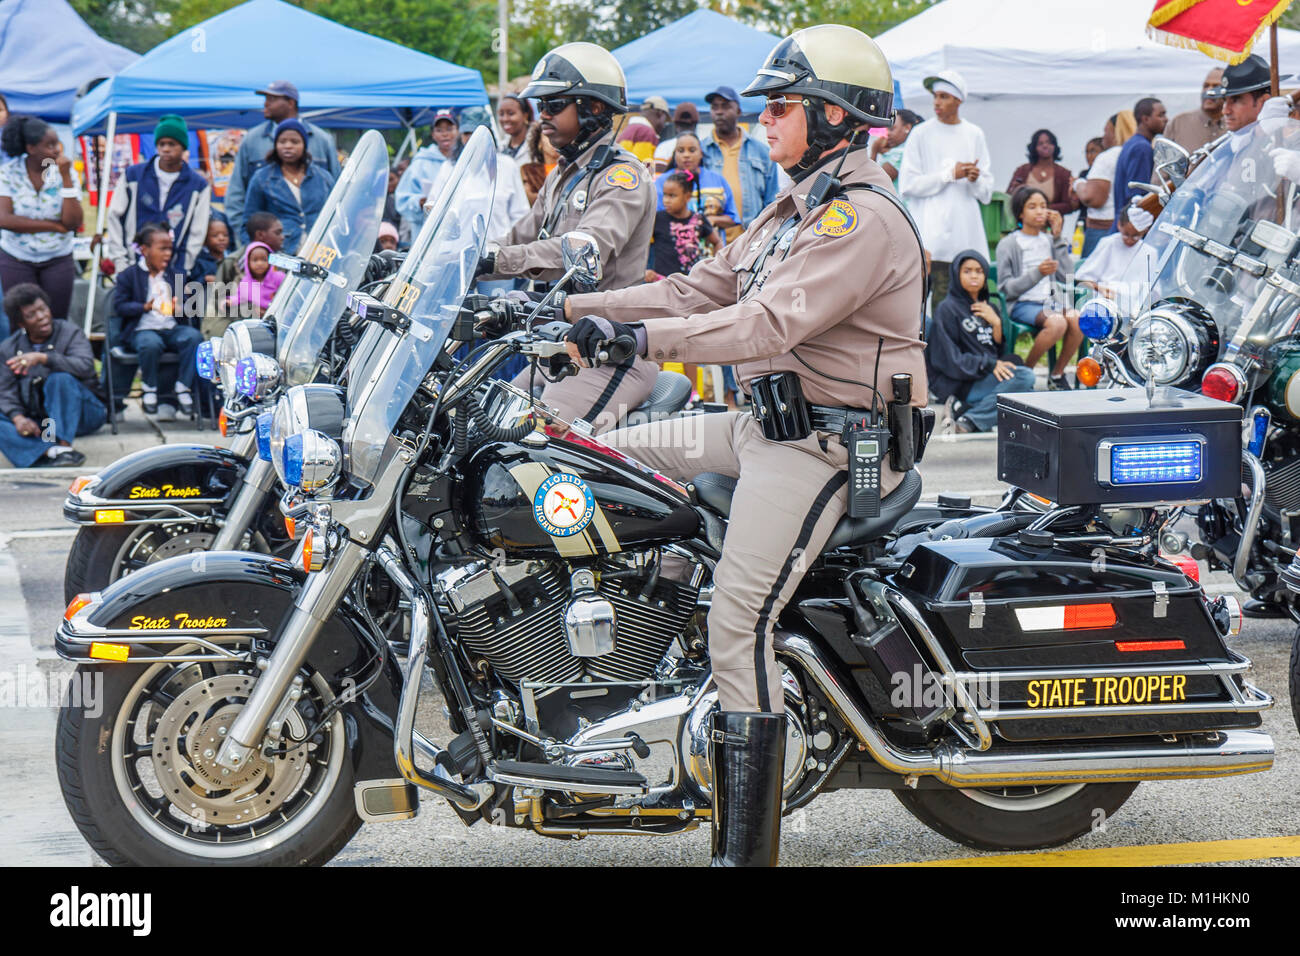 Miami Florida,Liberty City,Martin Luther King Jr Parade,participant,police communautaire,policier,moto,State Trooper,FL080121011 Banque D'Images